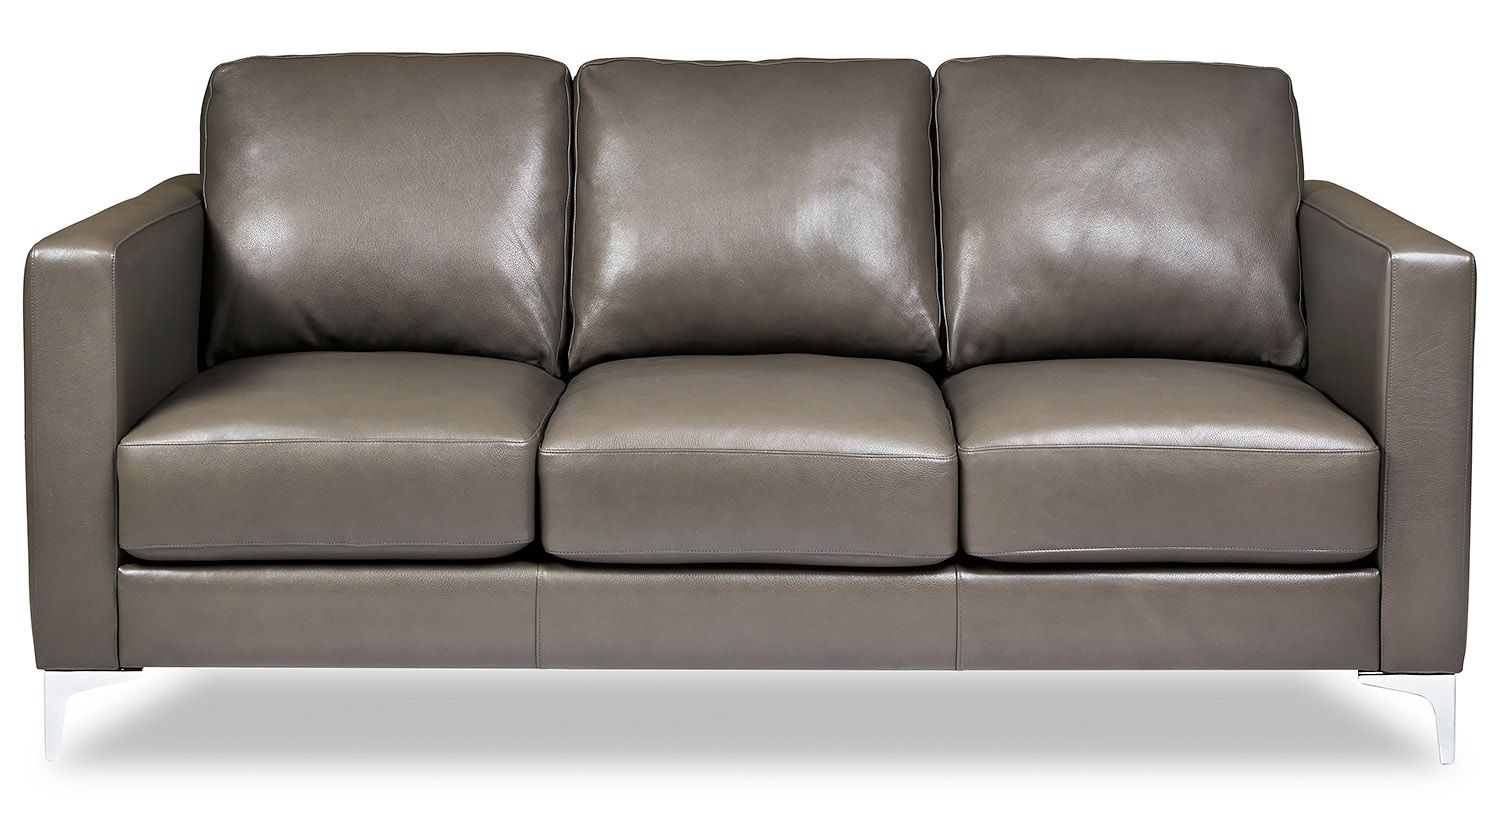 kendall sofa from american leather